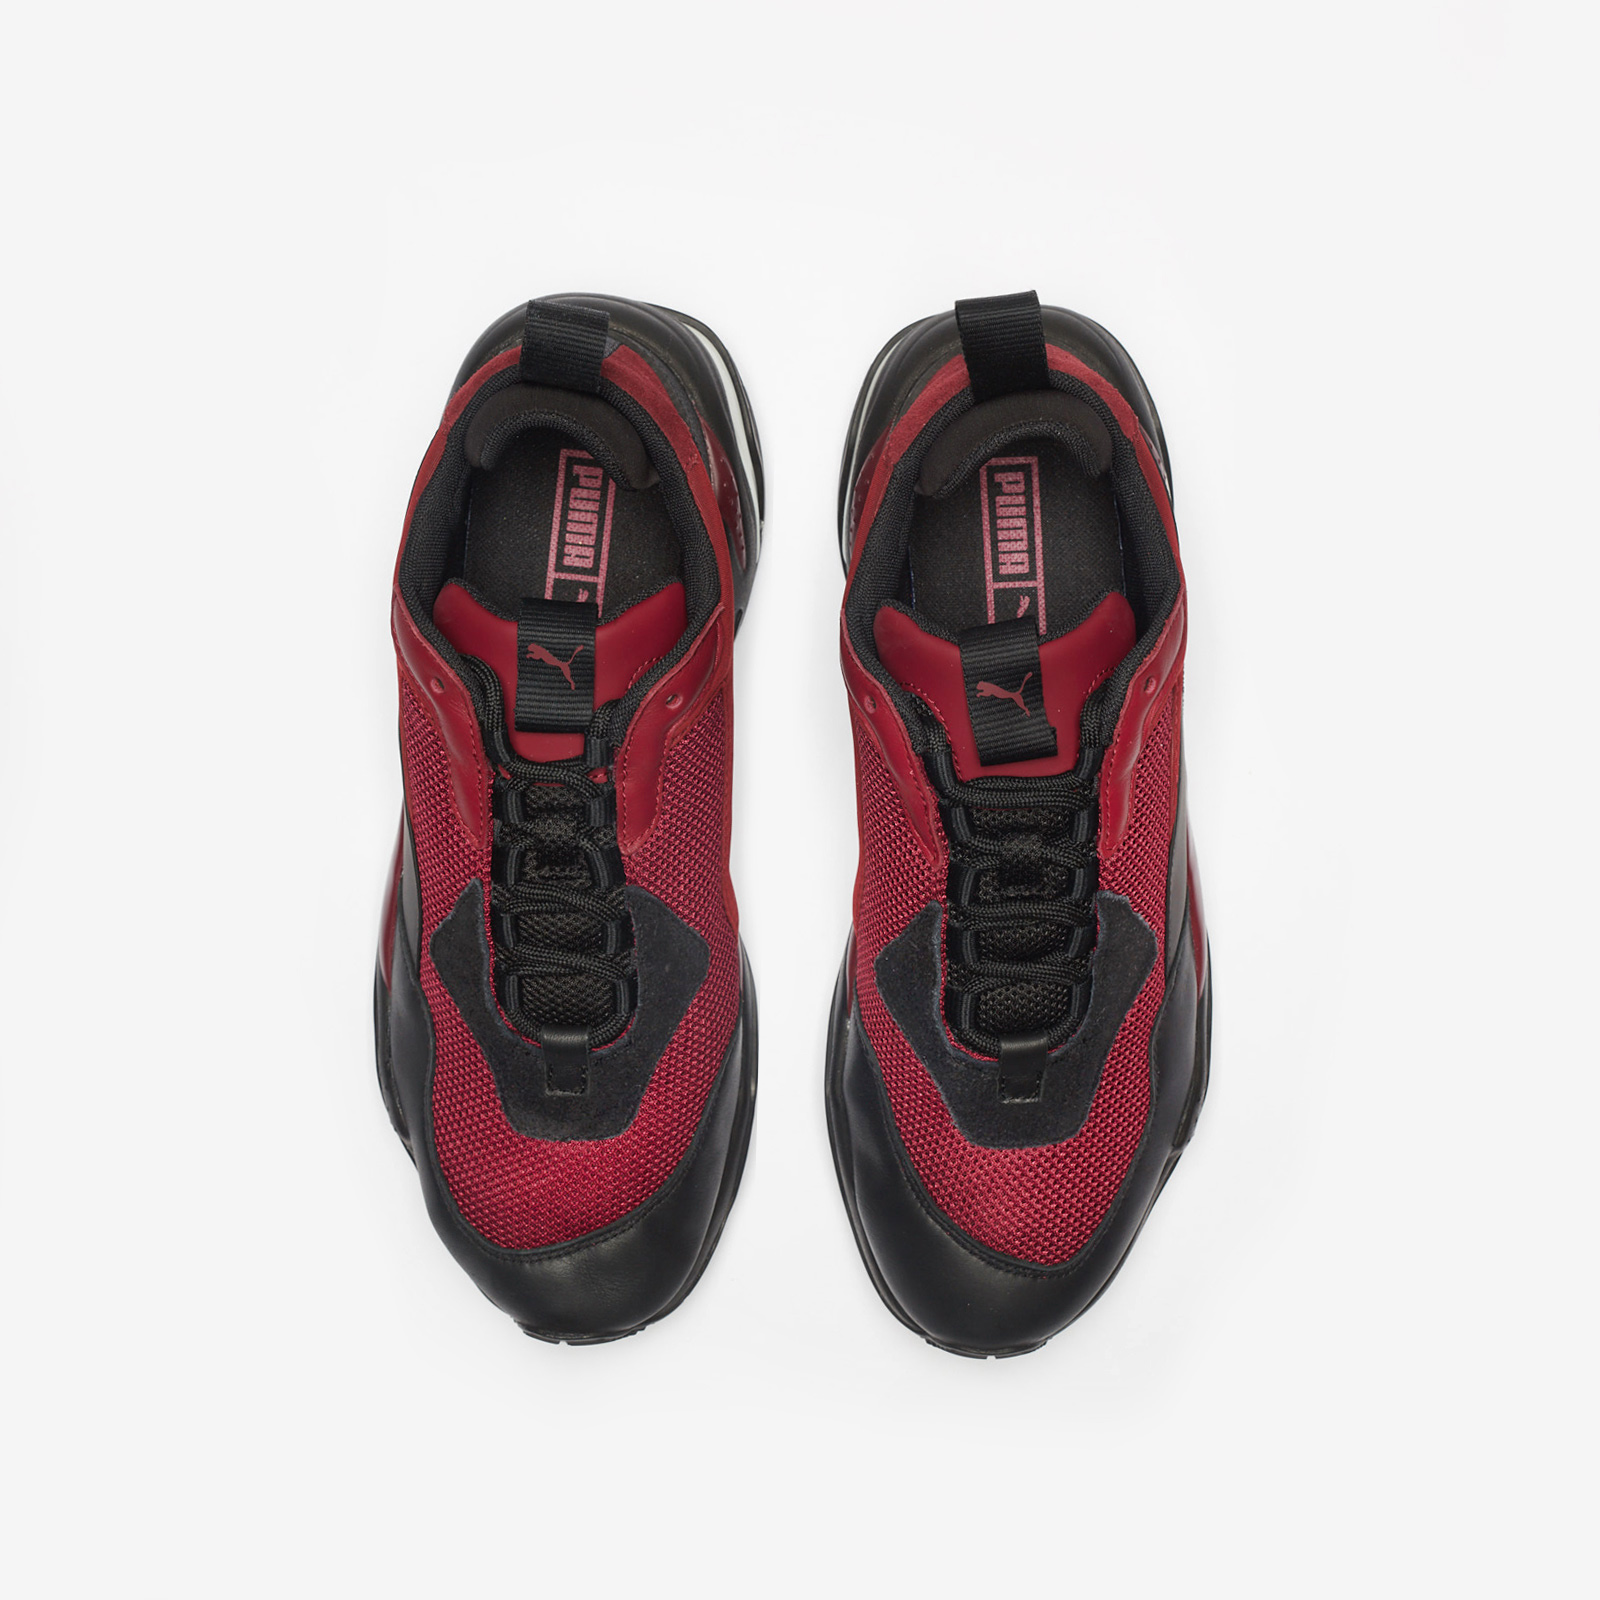 puma thunder spectra Rhododendron top